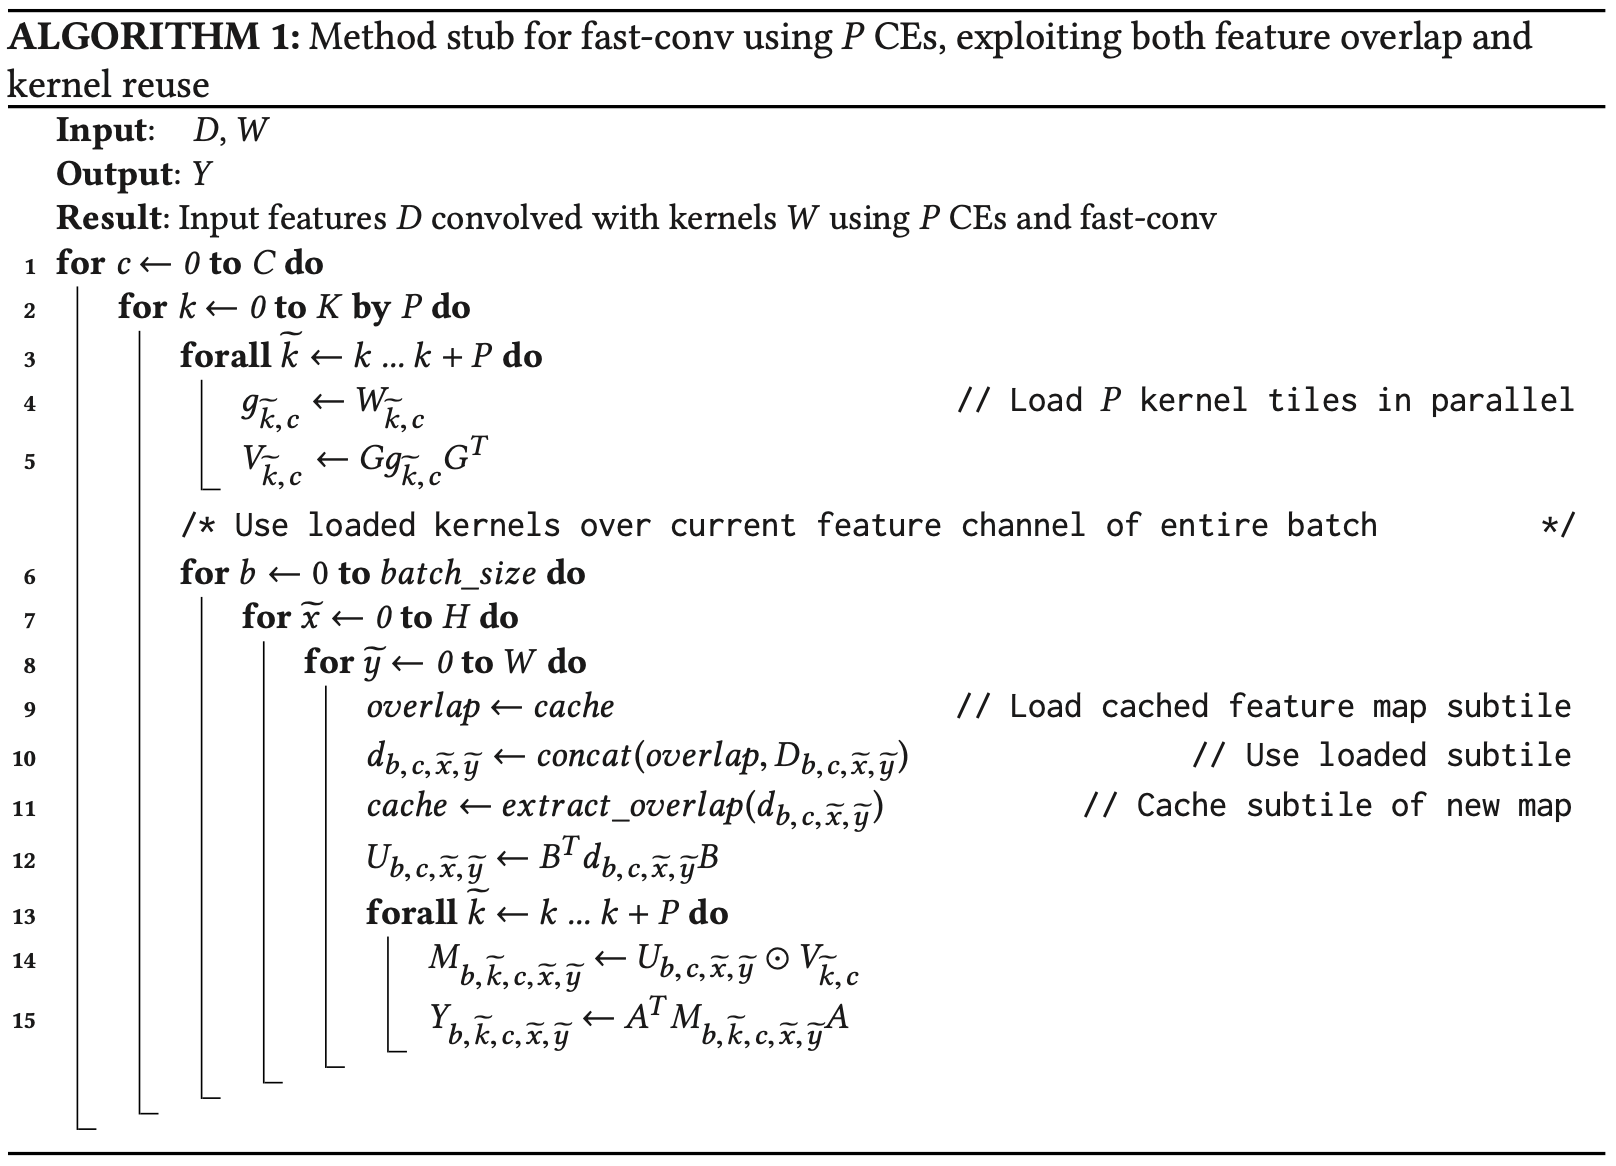 Method stub for fast-conv using P CEs, exploiting both feature overlap and kernel reuse